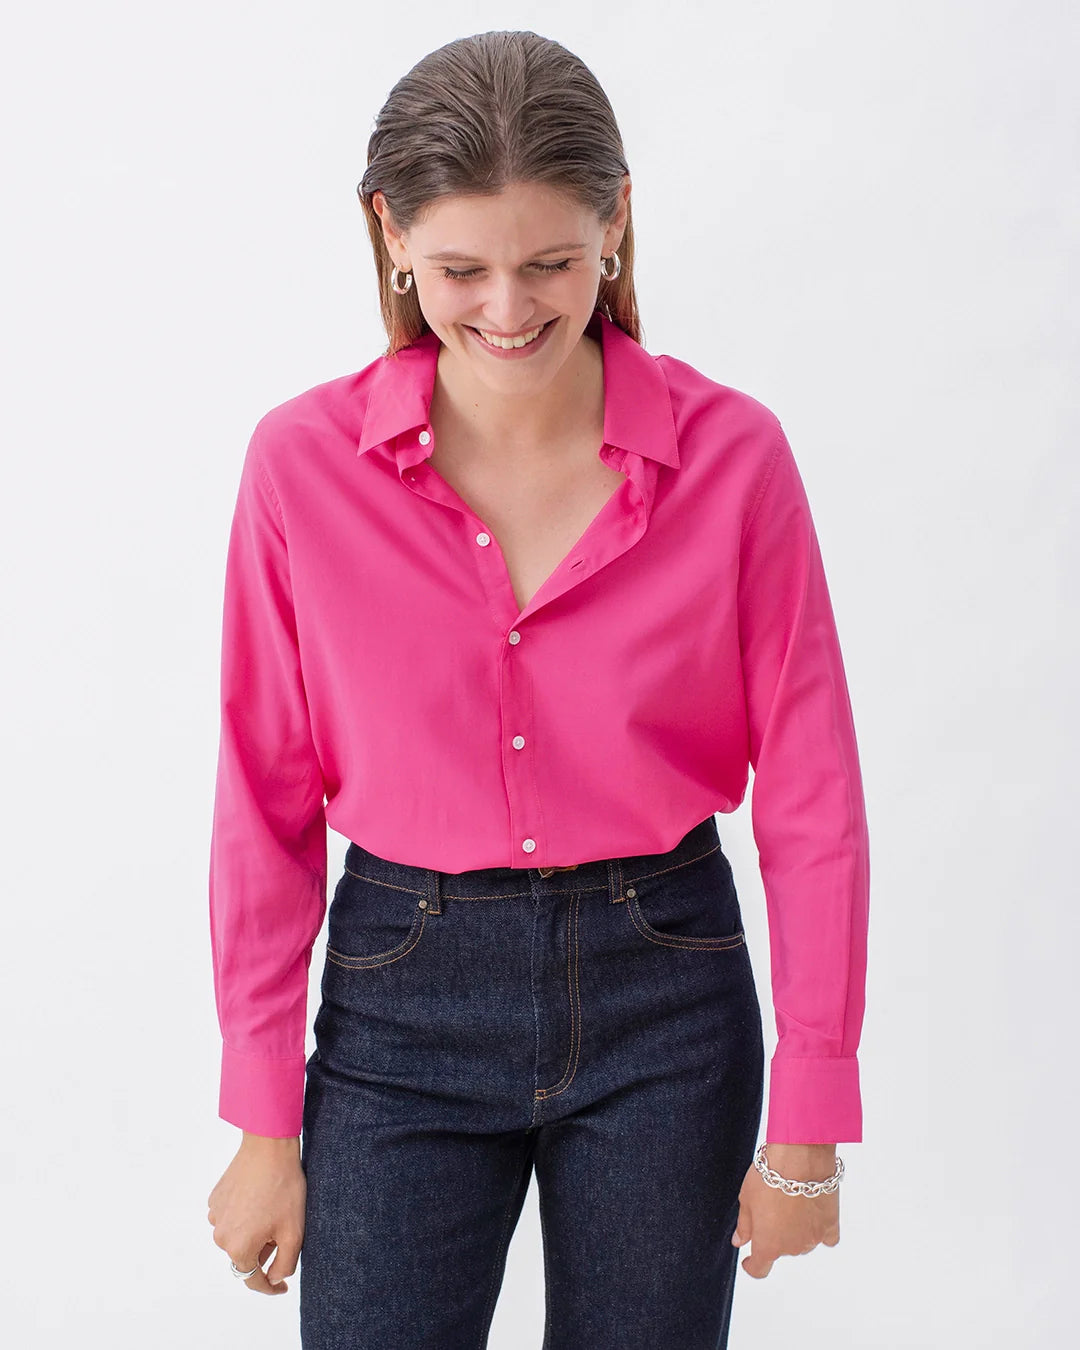 17h10-chemise-hudson-fuchsia-barbiecore-ethique-eco-reponsable-made-in-europe-working-girl-boss-1